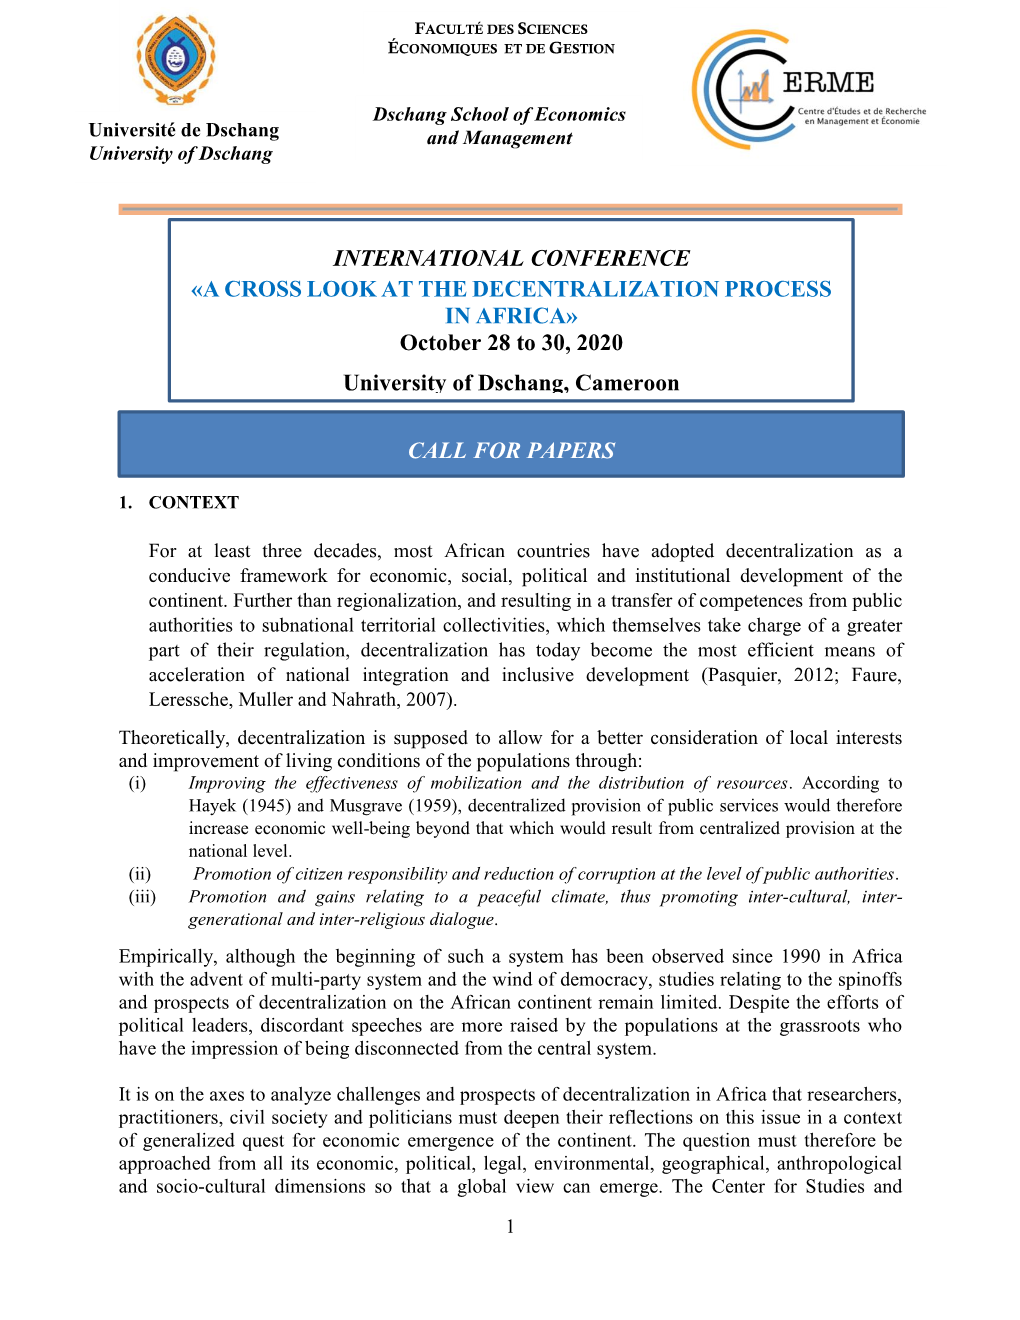 INTERNATIONAL CONFERENCE «A CROSS LOOK at the DECENTRALIZATION PROCESS in AFRICA» October 28 to 30, 2020 University of Dschang